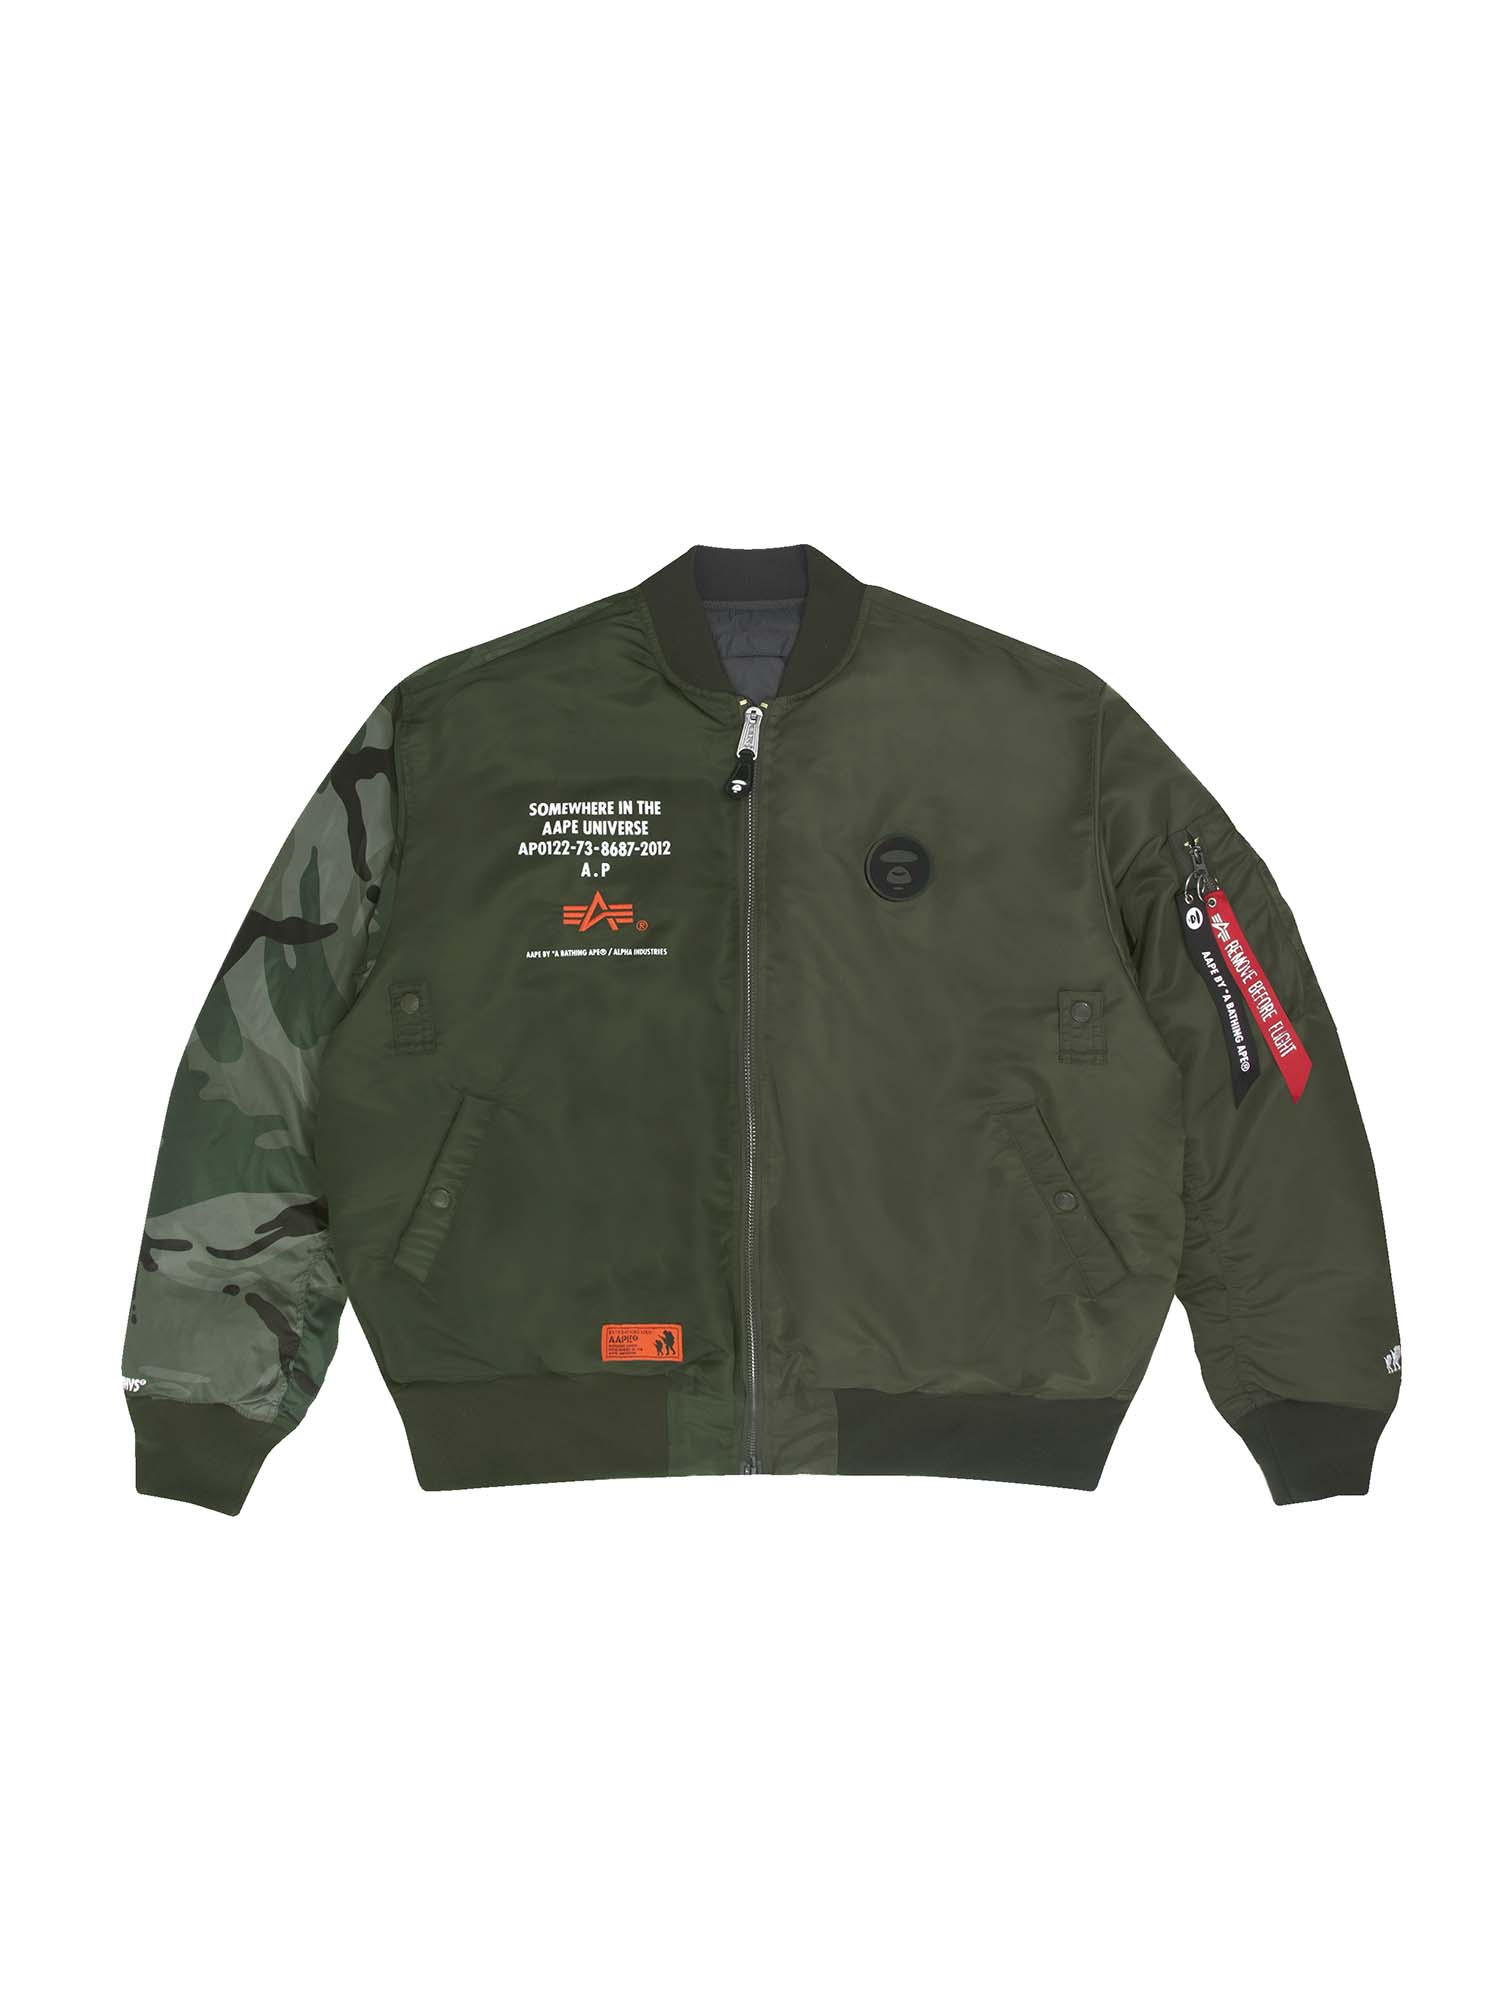 AAPE X ALPHA REVERSIBLE MA-1 DOWN JACKET OUTERWEAR Alpha Industries, Inc. OLIVE 2XL 